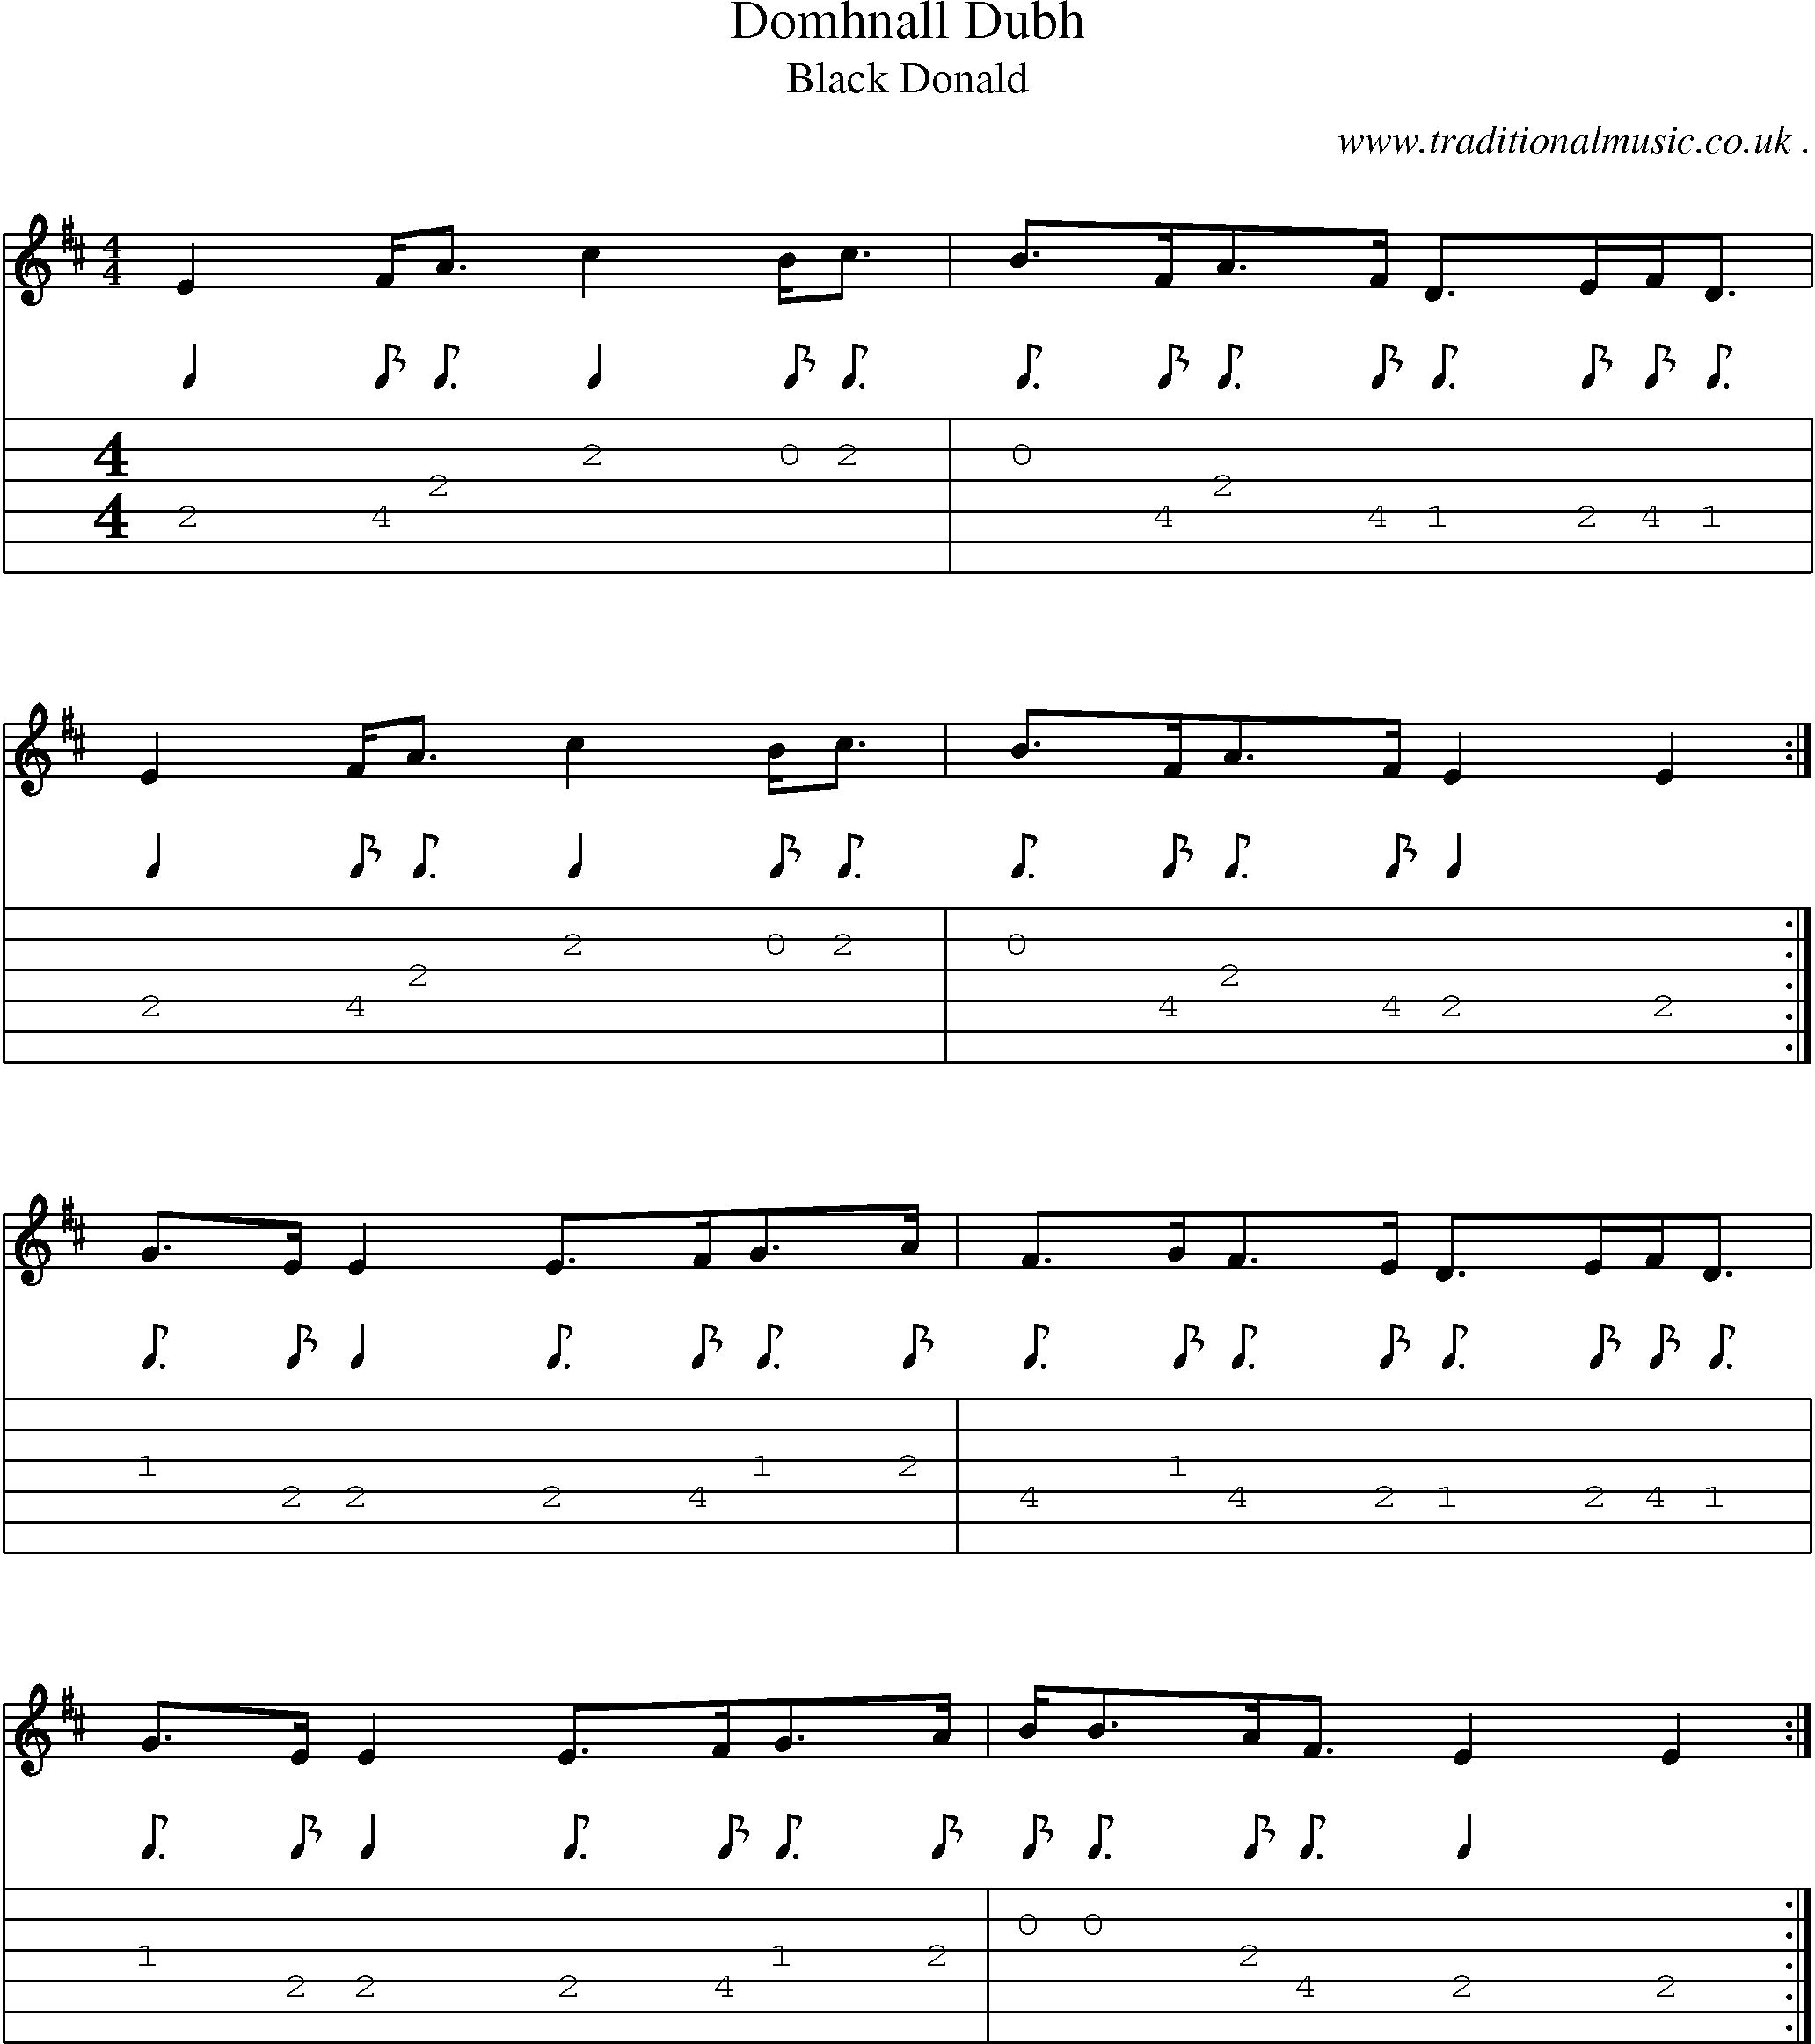 Sheet-music  score, Chords and Guitar Tabs for Domhnall Dubh